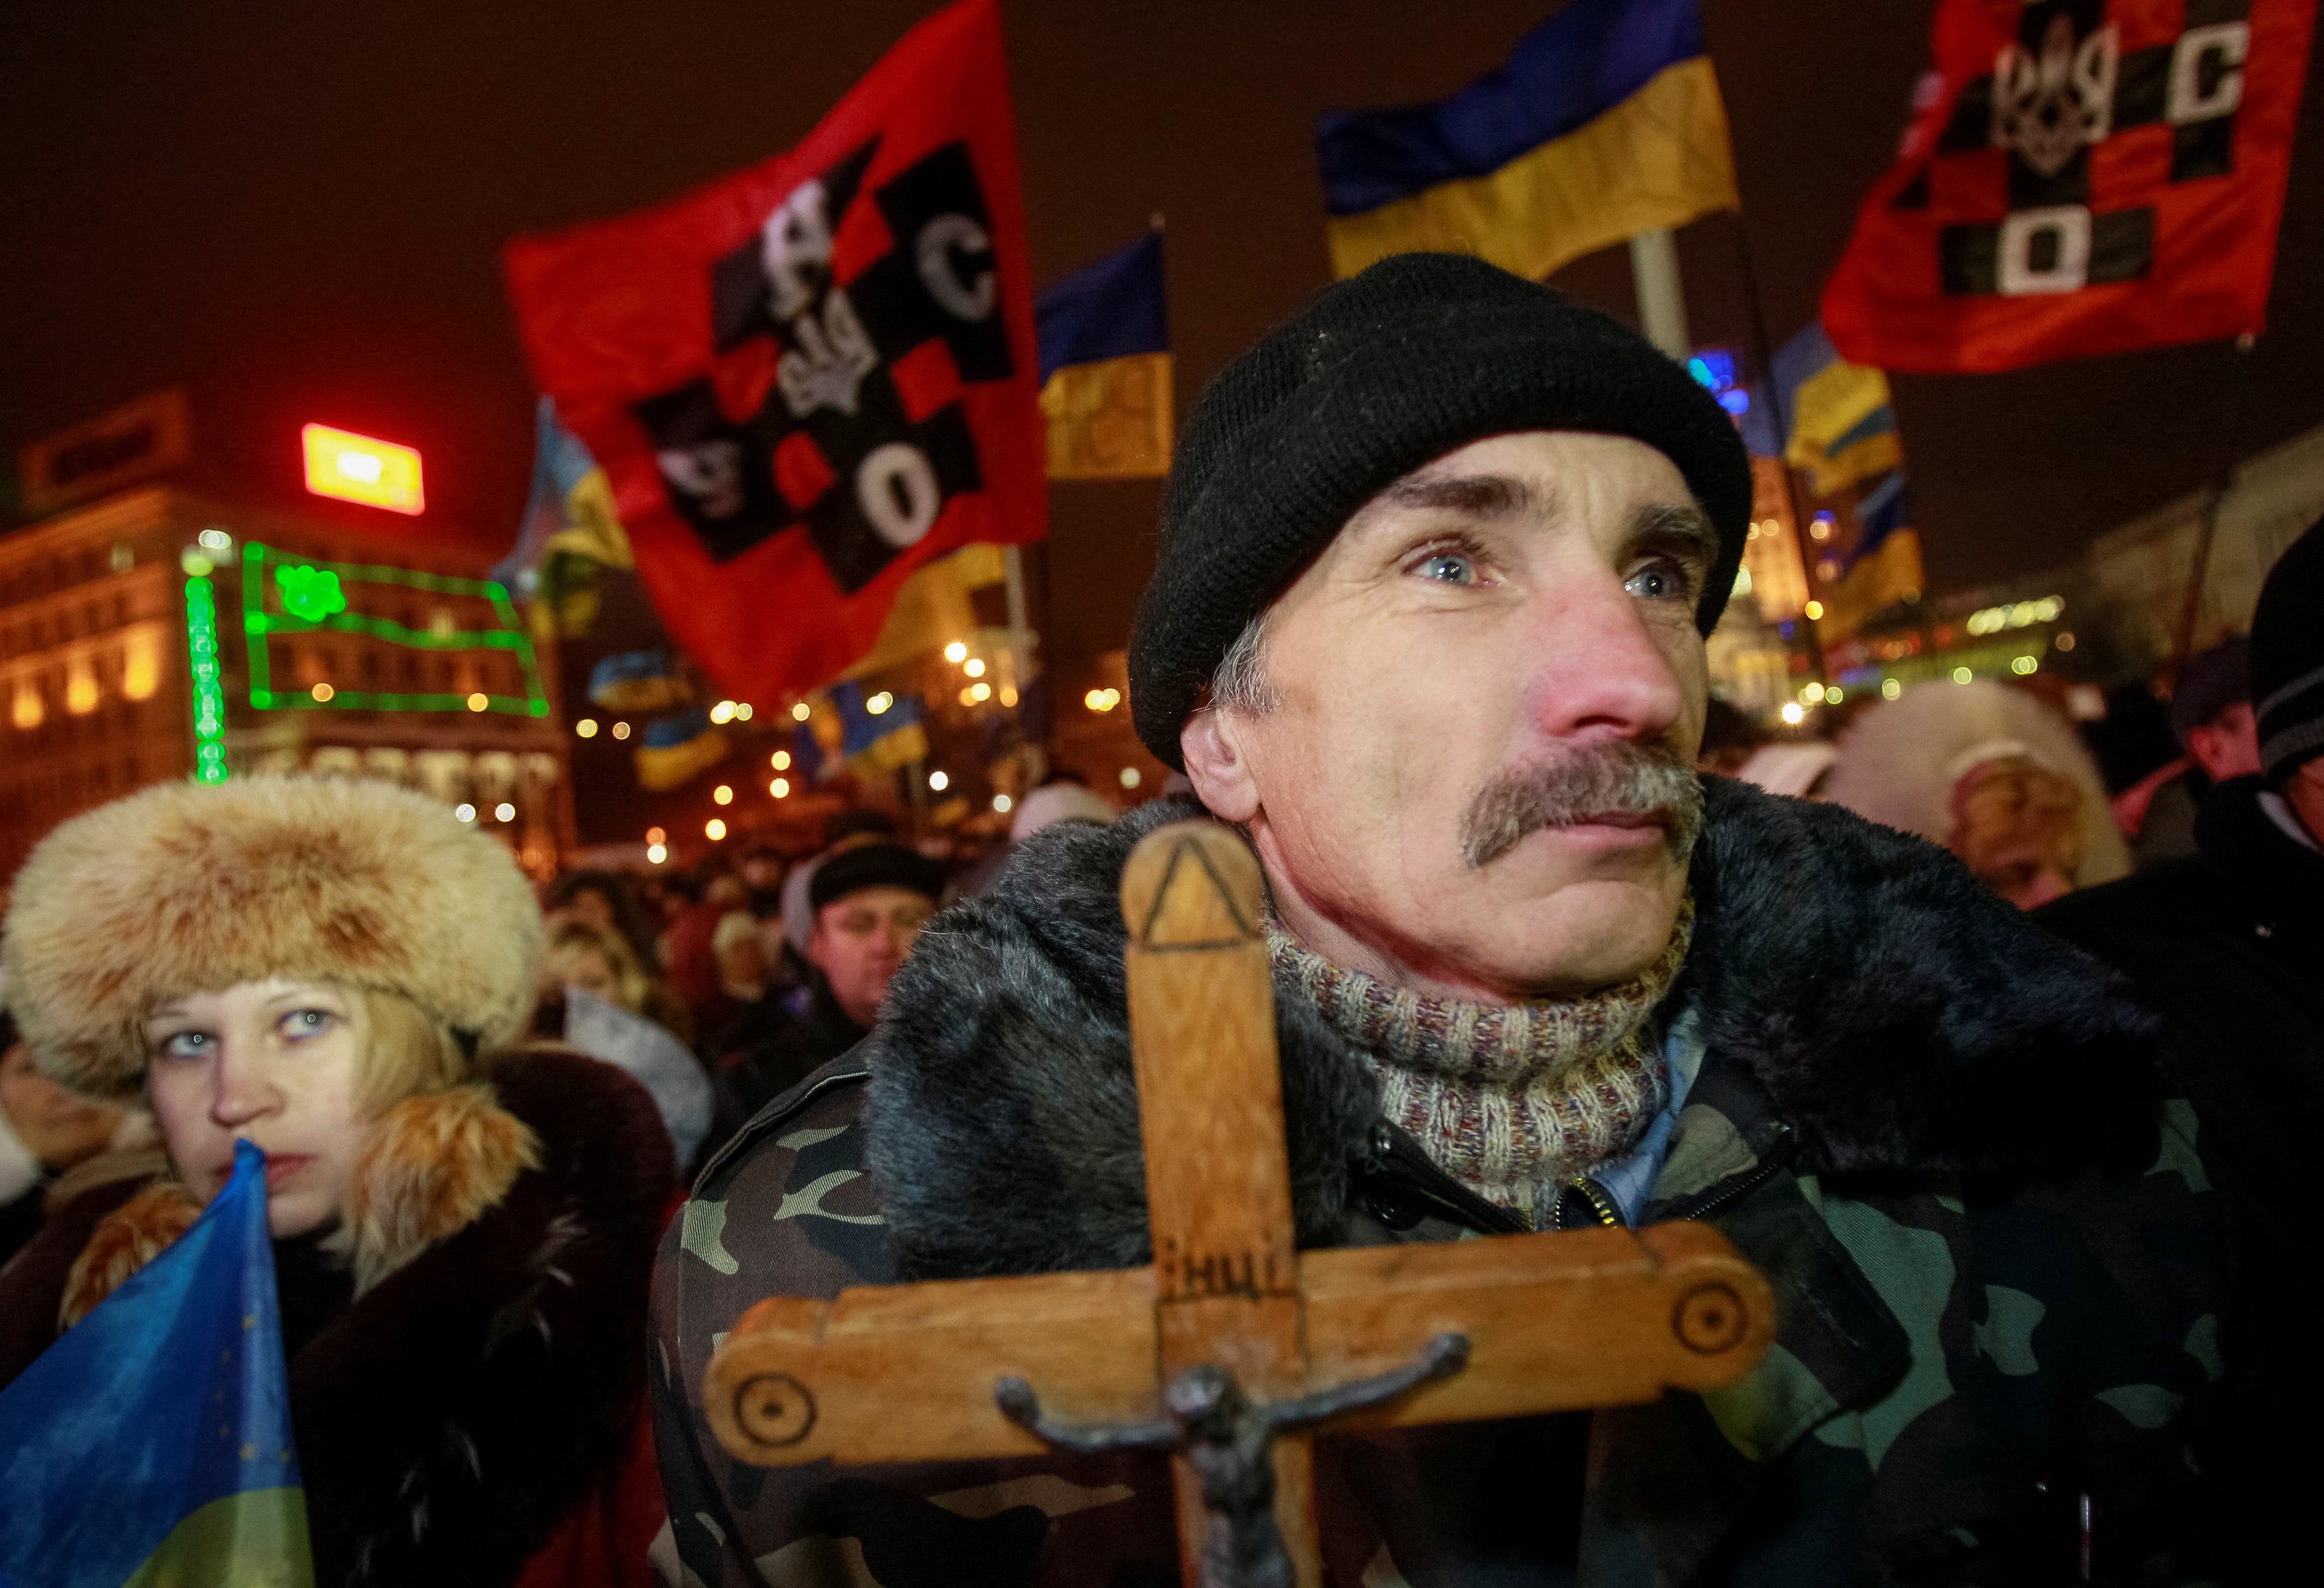 Pro-European integration protesters attend a rally in Maidan Nezalezhnosti on Independence Square in central Kyiv in December 2013